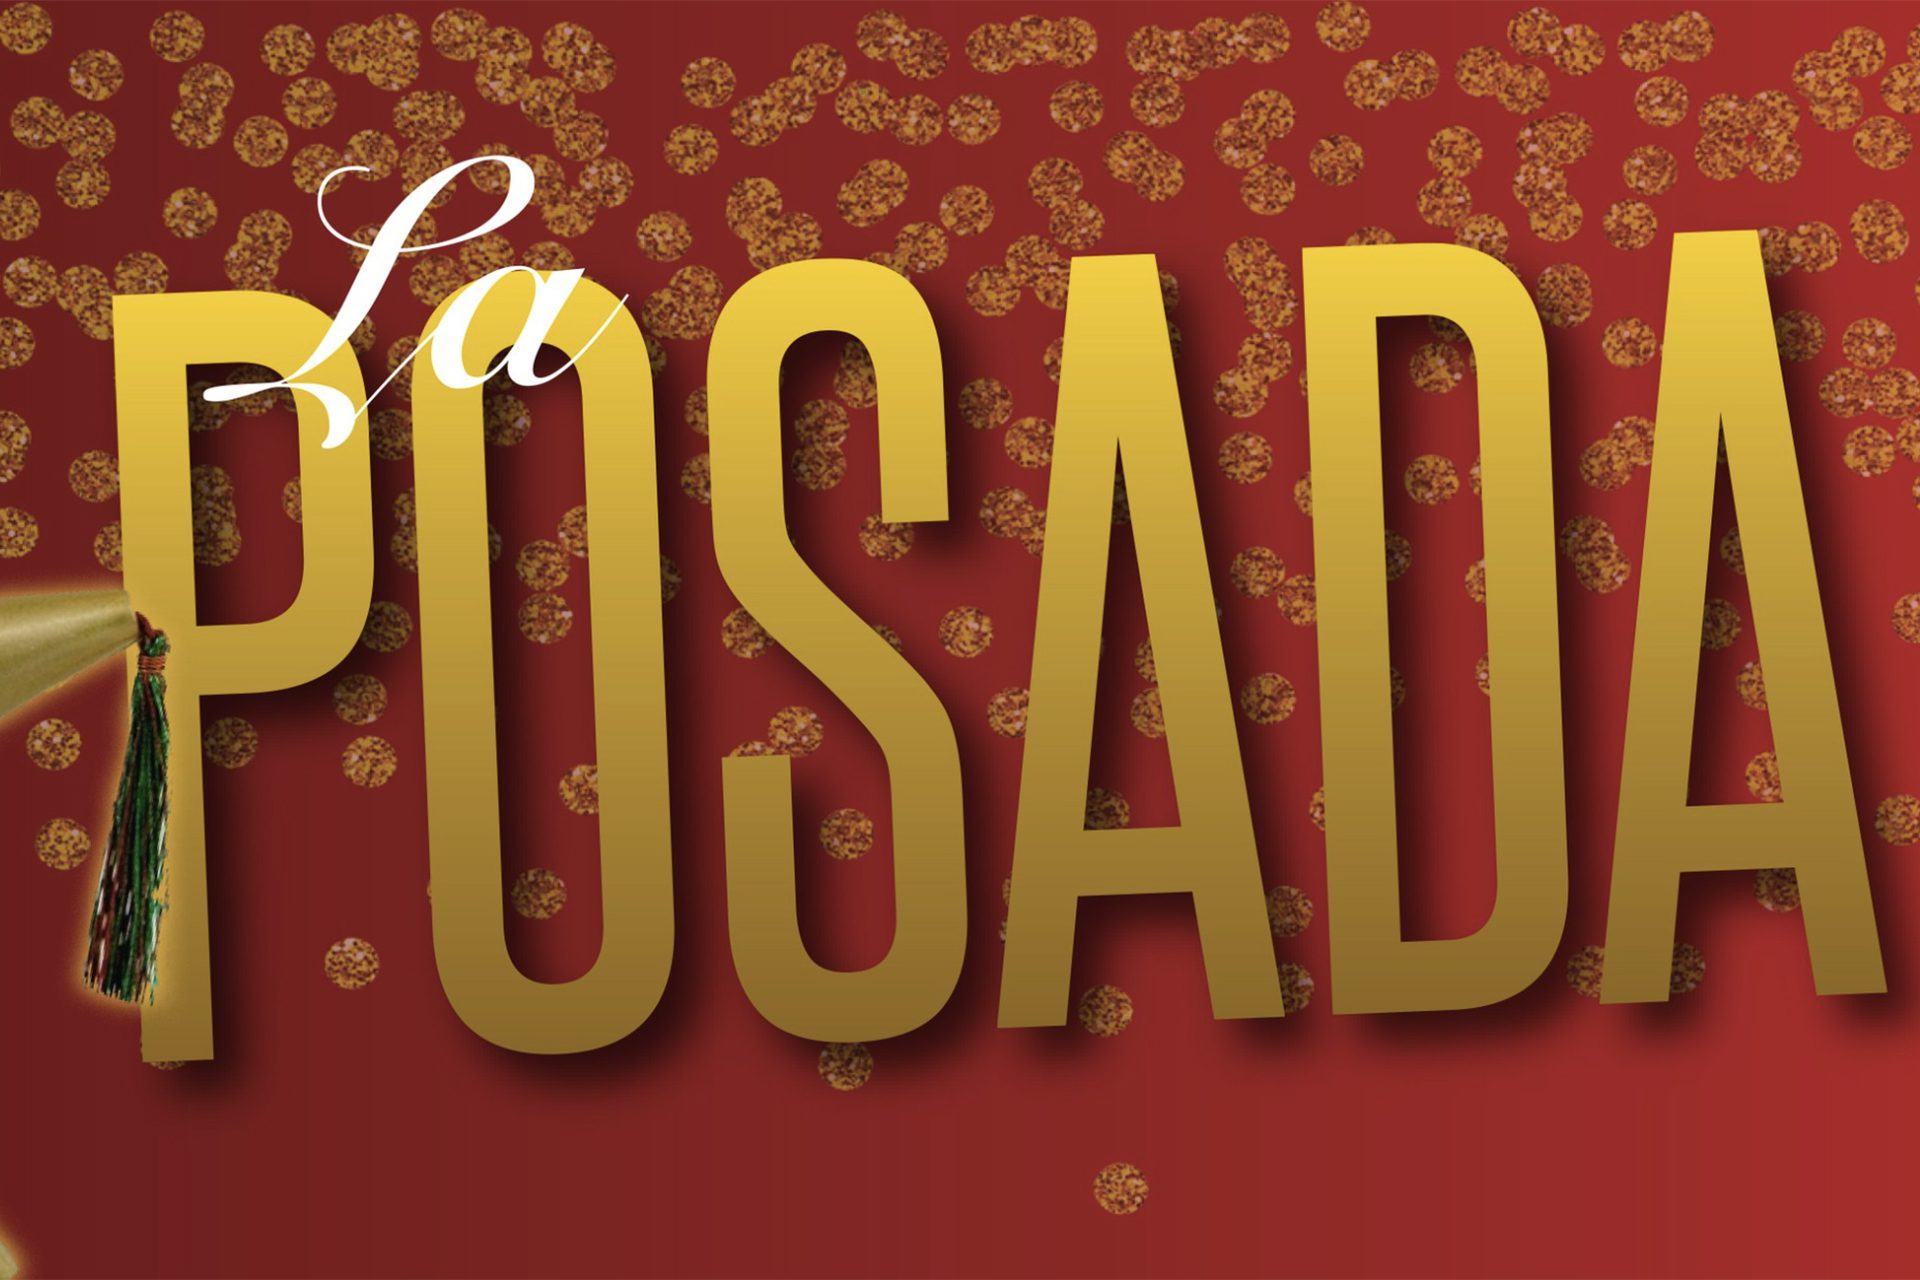 "La Posada" written in gold on a red background